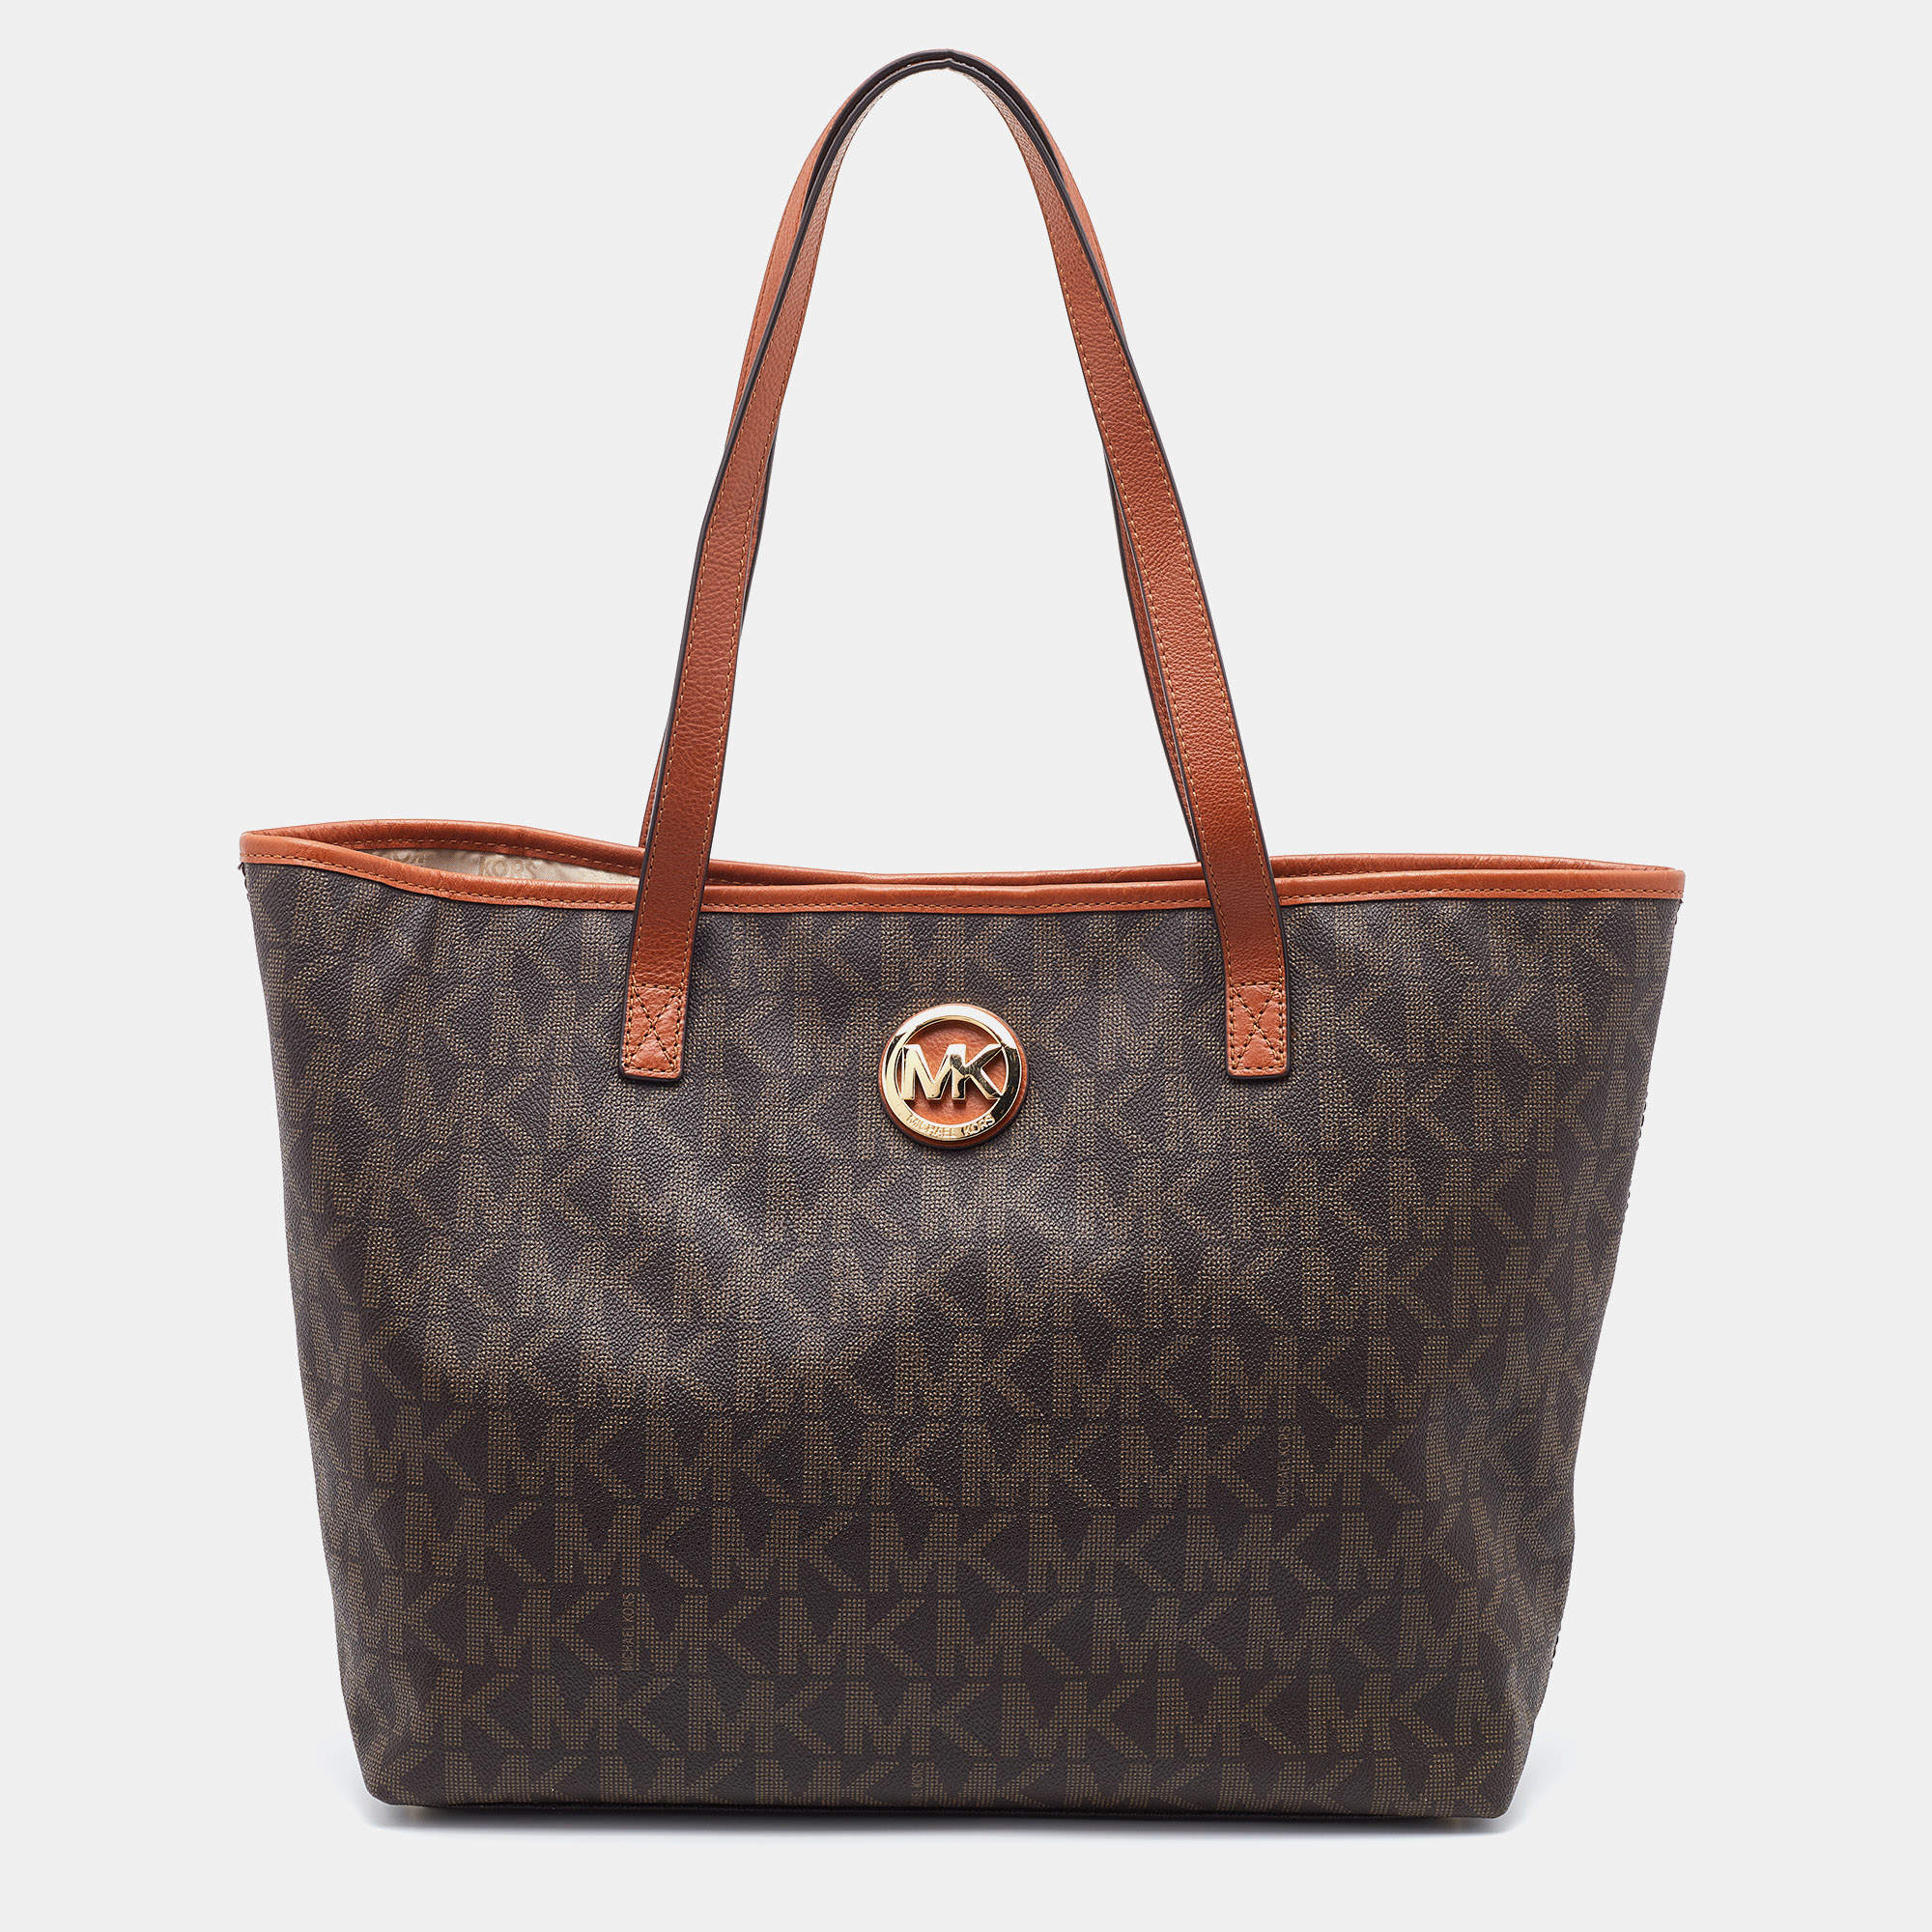 MICHAEL Michael Kors Brown Signature Coated Canvas and Leather Jet Set Tote